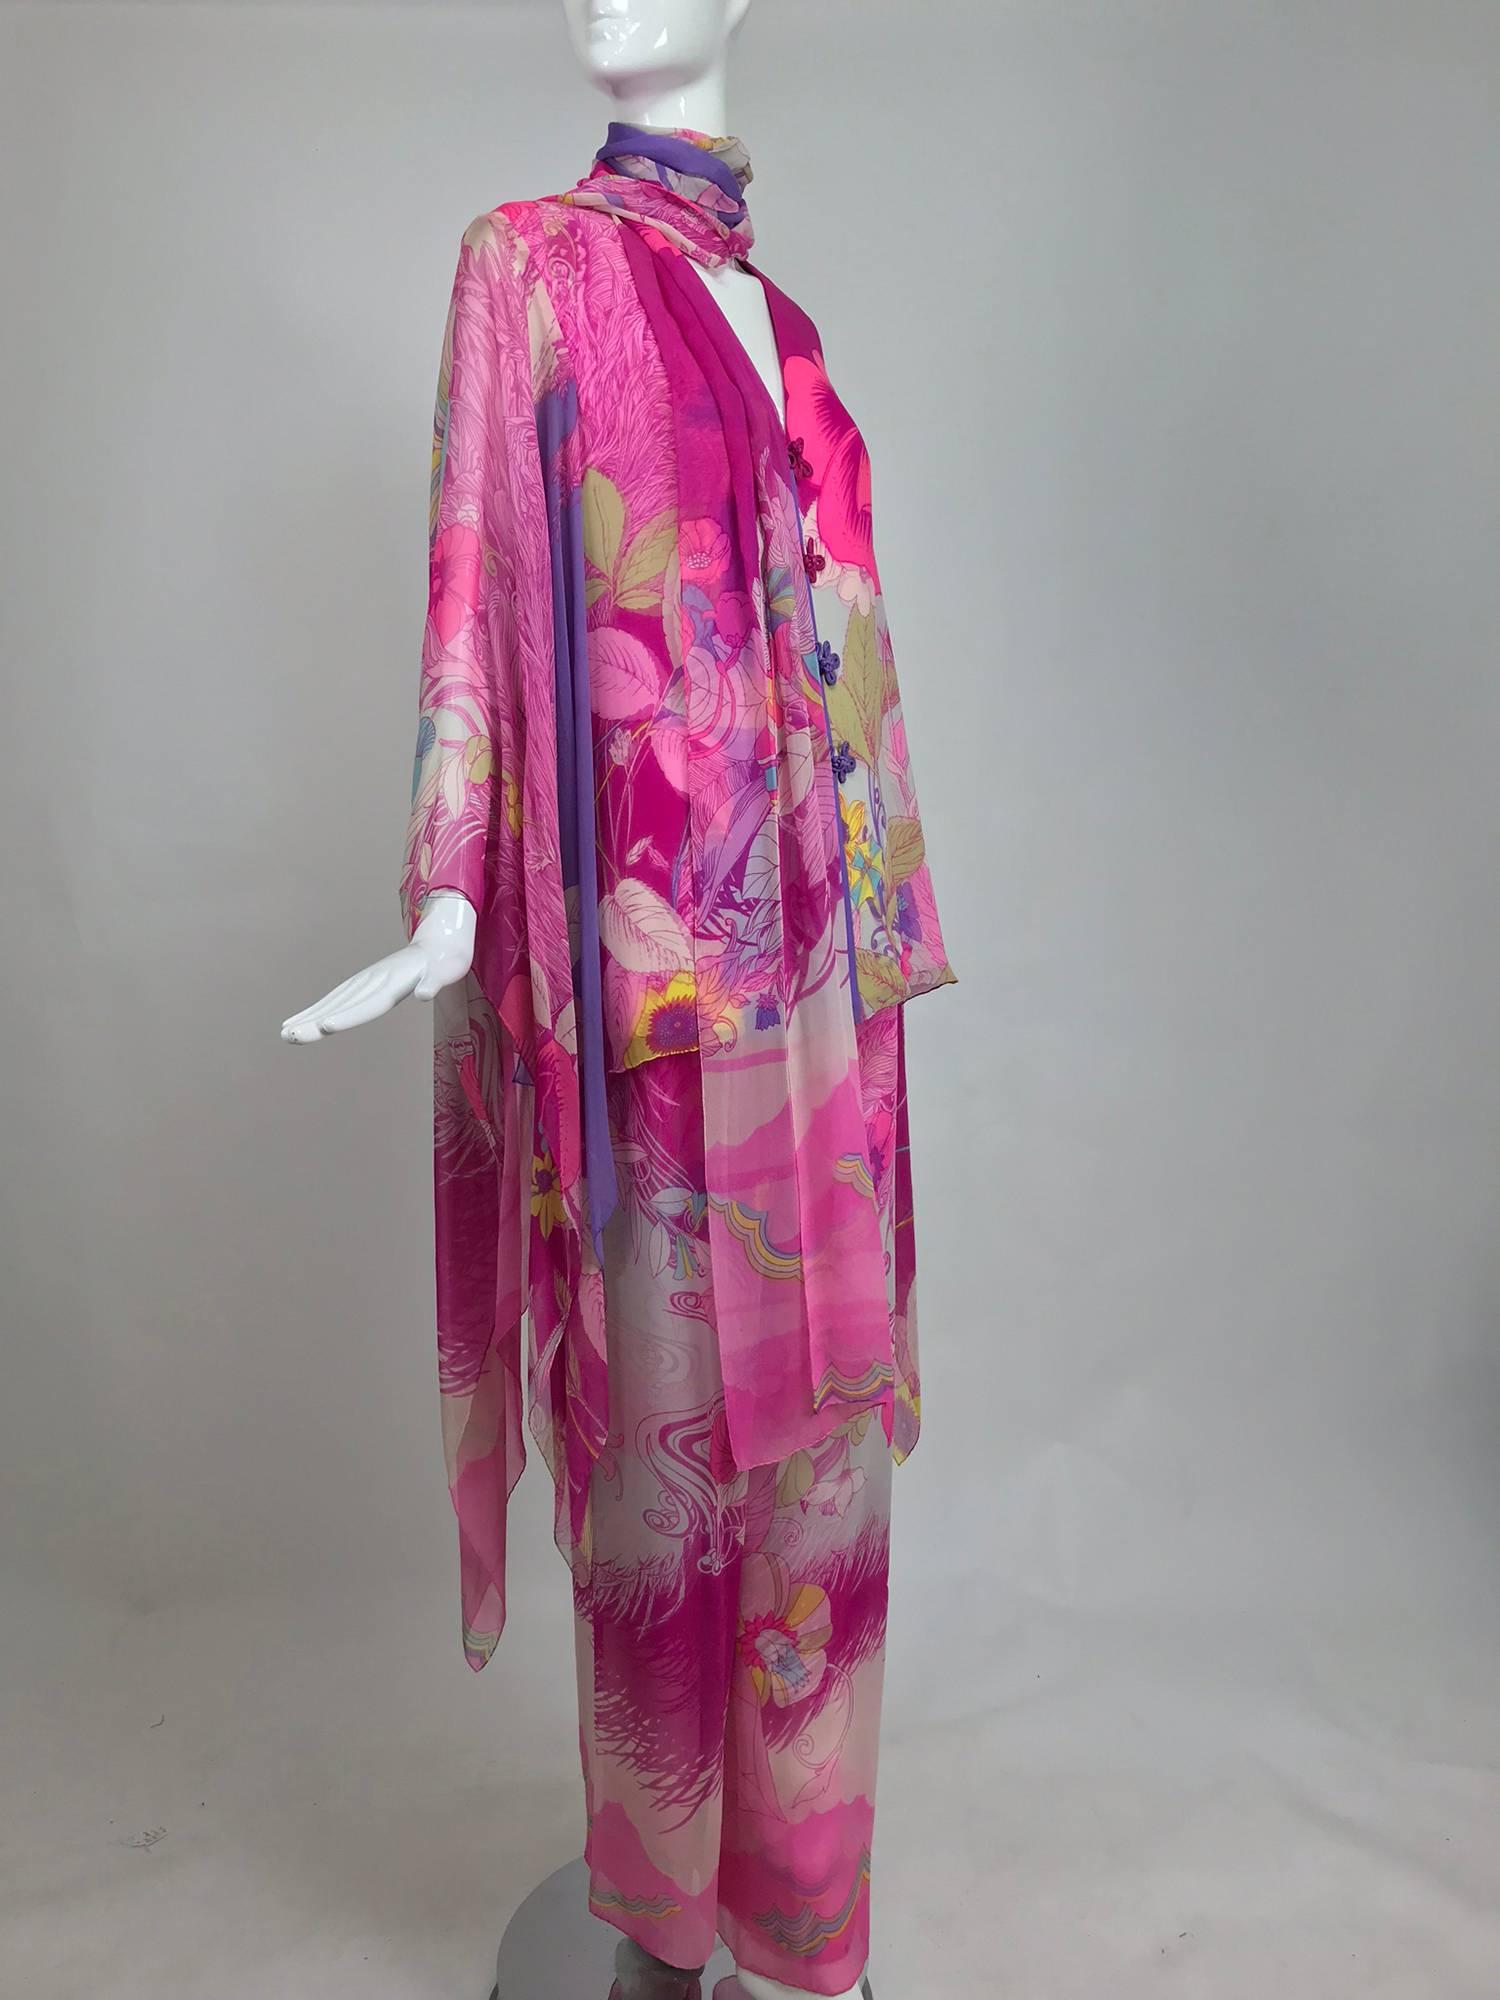 Women's Hanae Mori pink floral silk kimono evening set in The Mets Collection 1966-69